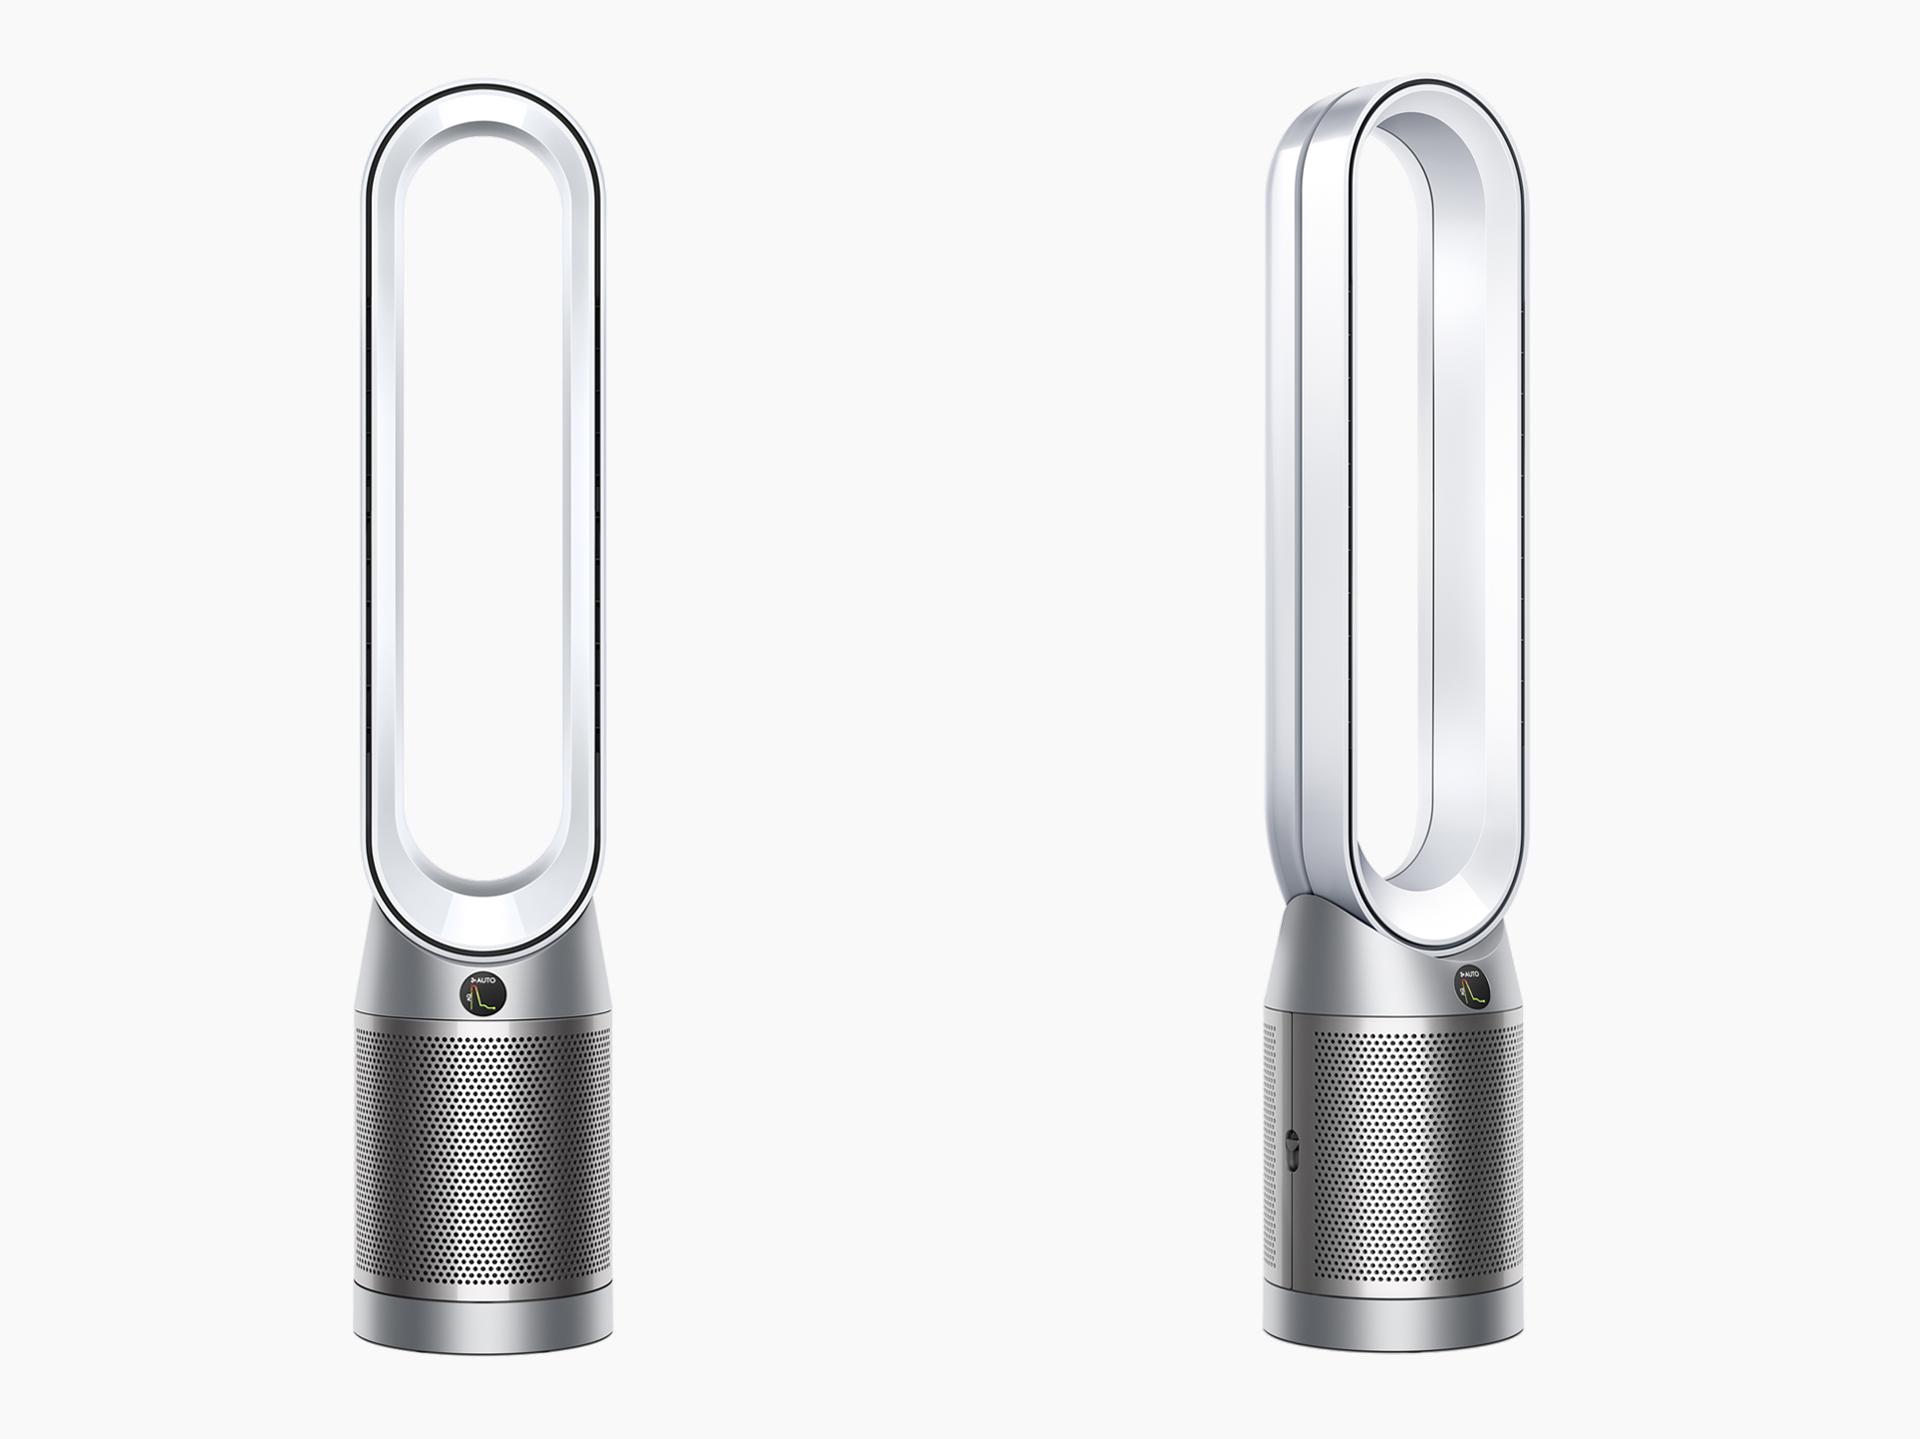 Dyson Purifier Cool Autoreact tower fan front and side views